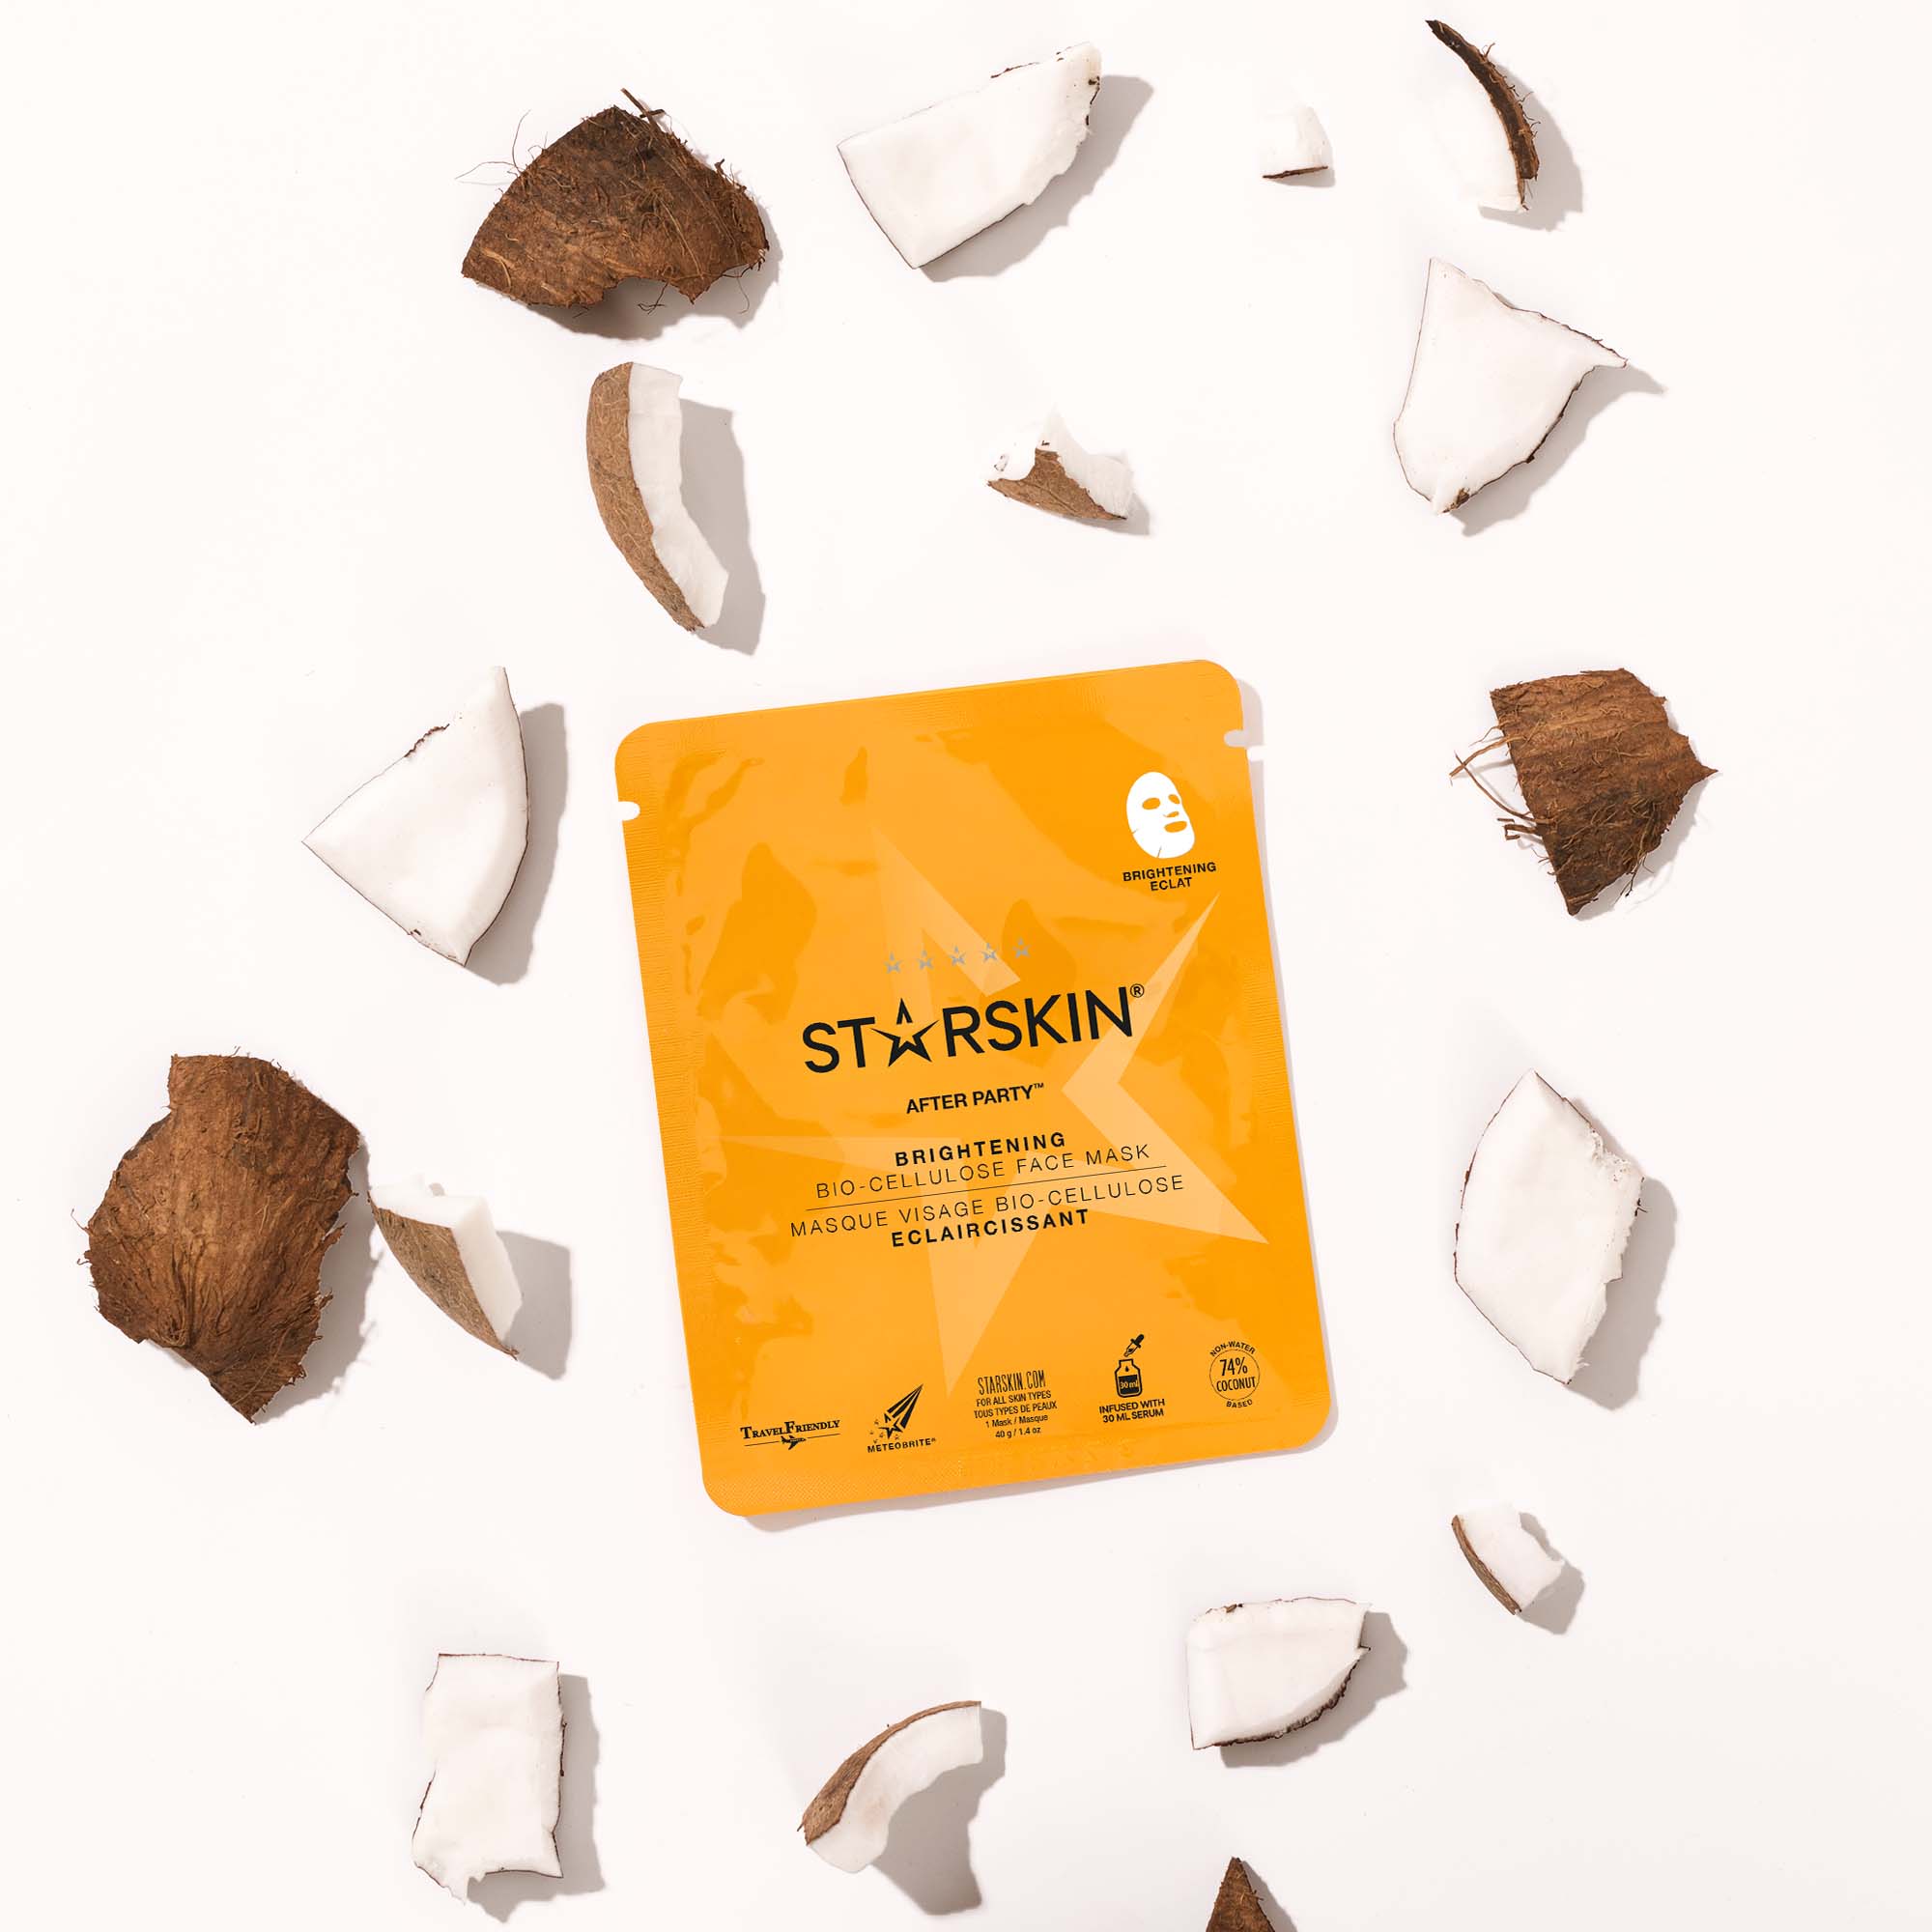 After Party® packaging from the product with parts of coconut shell around it